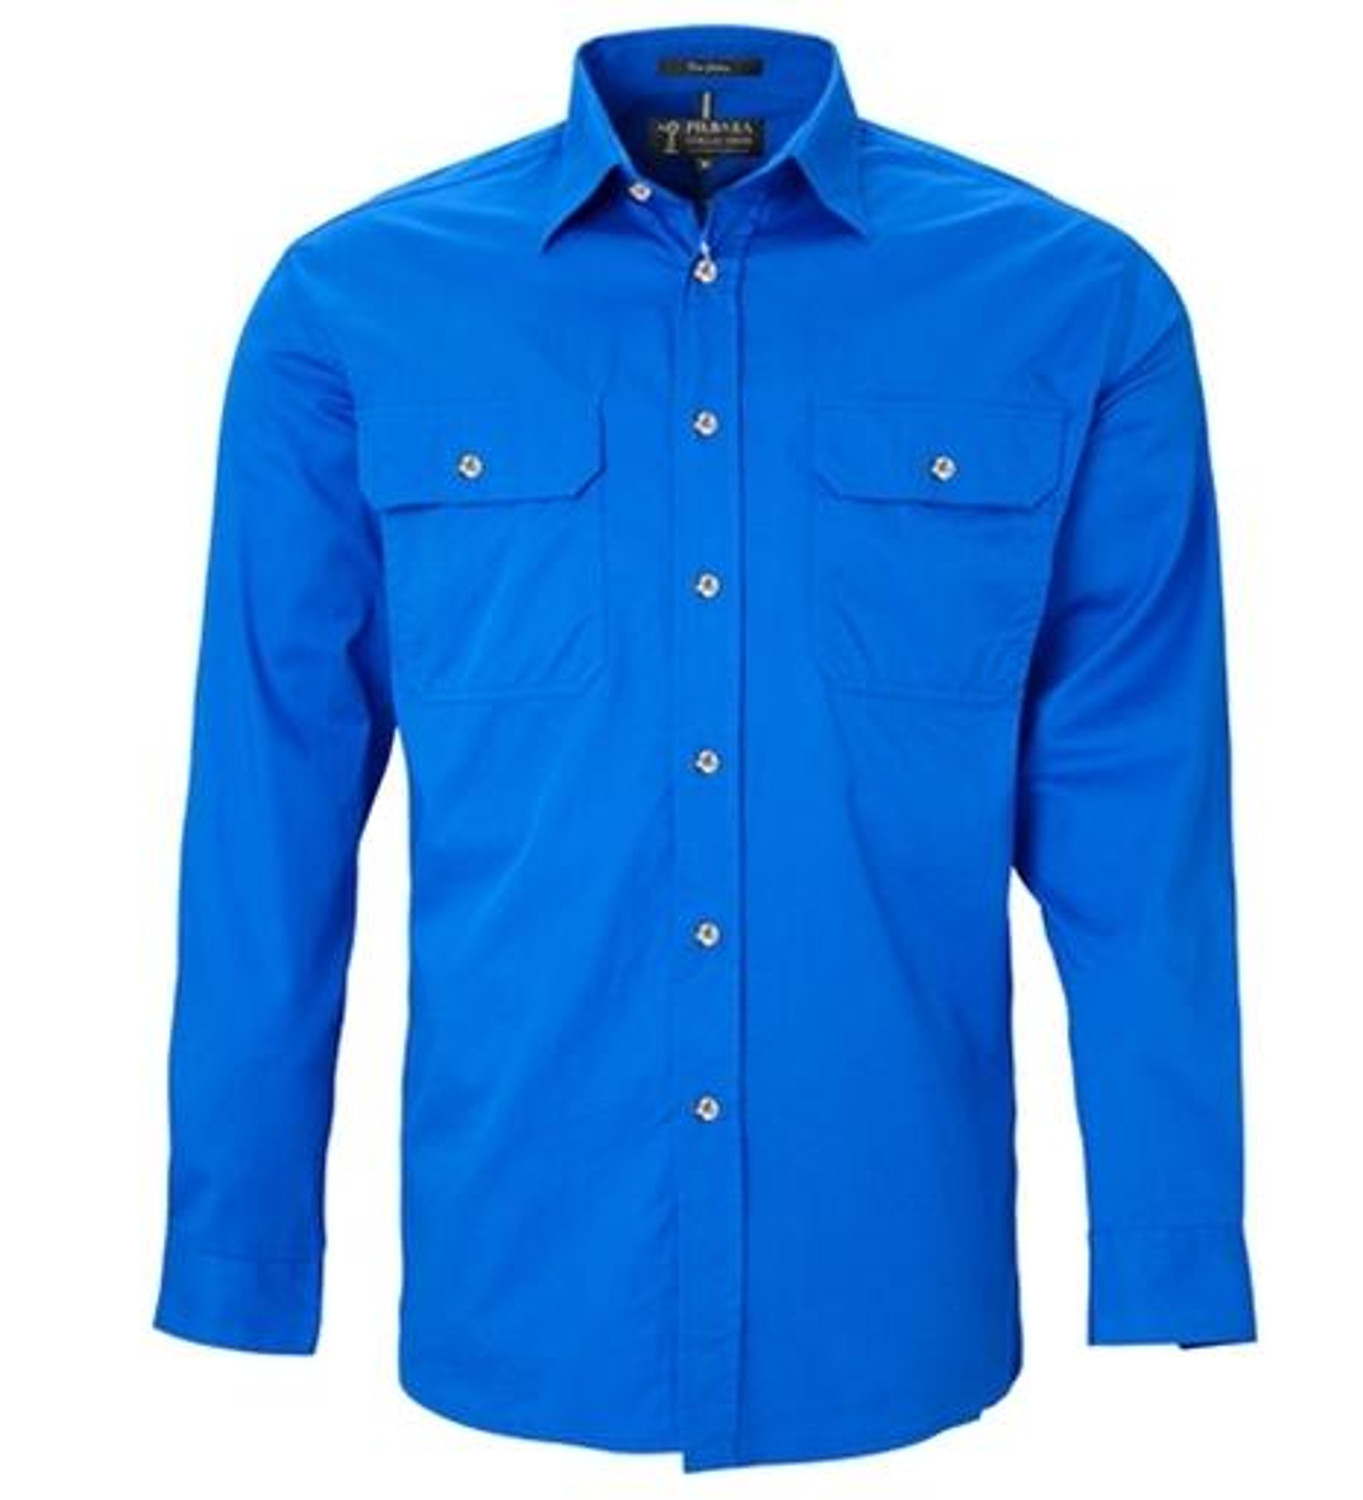 FREE EMBROIDERY - Mens Cobalt Blue OPEN FRONT Shirt buy 20